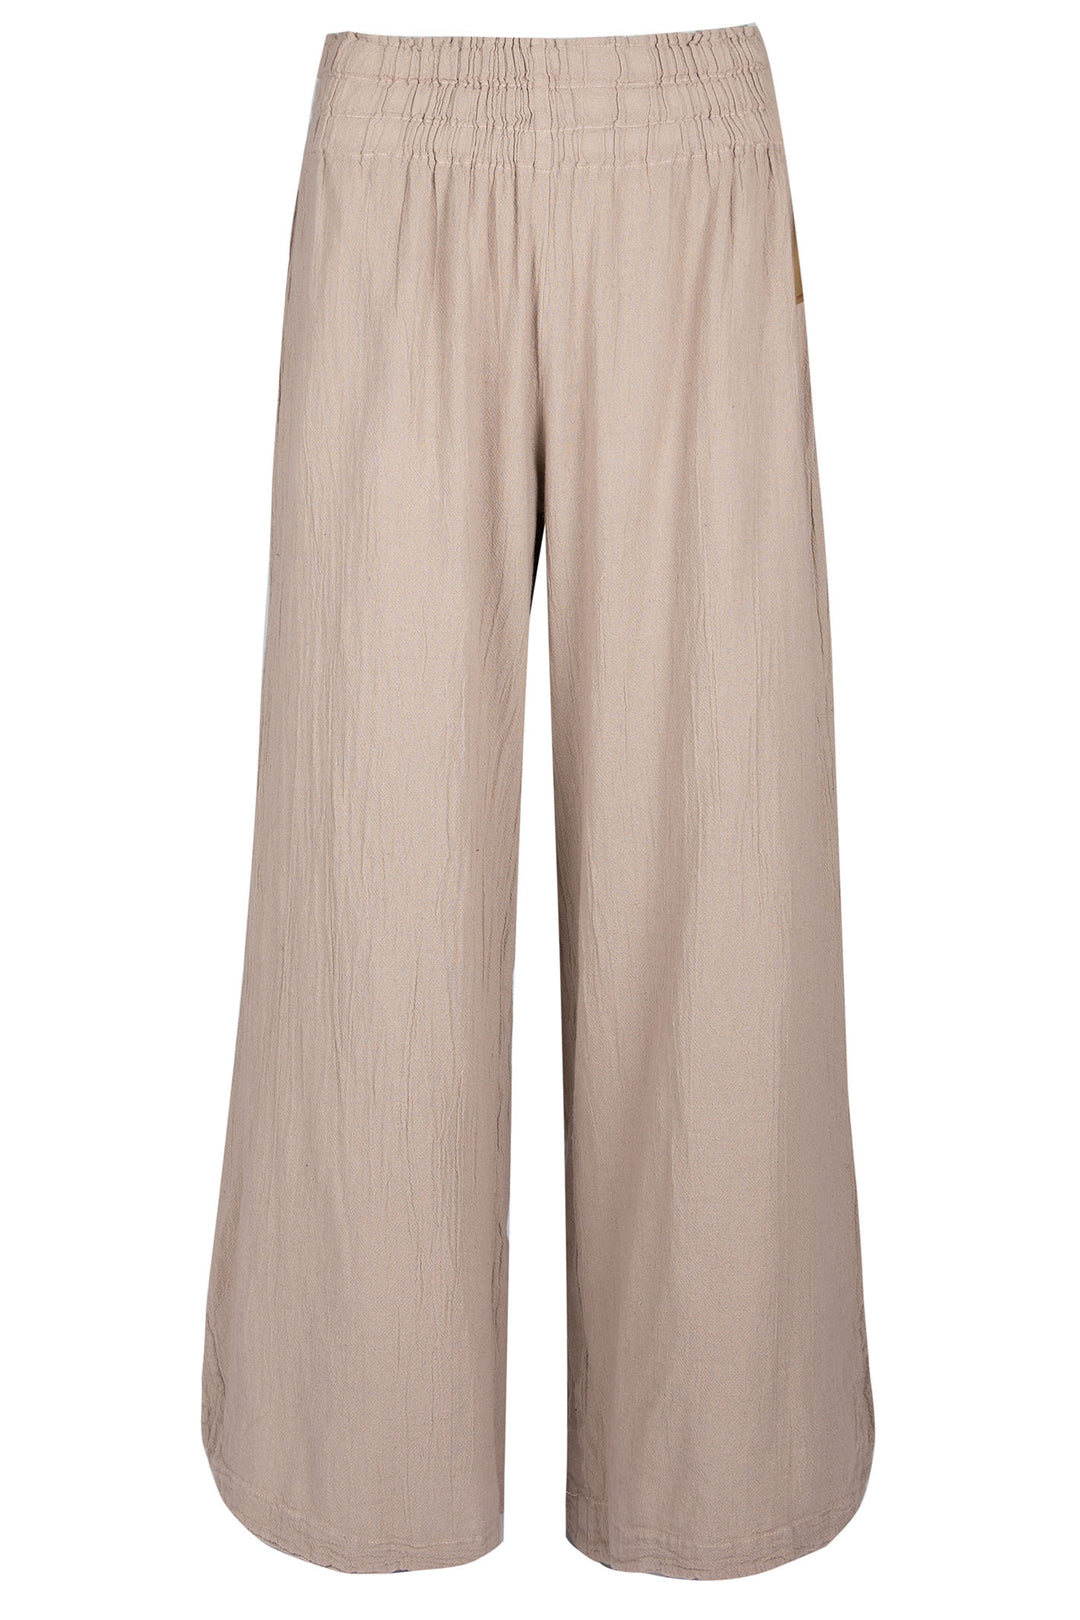 Onelife P609 Opalo Taupe Wide Leg Flared Trousers - Experience Boutique